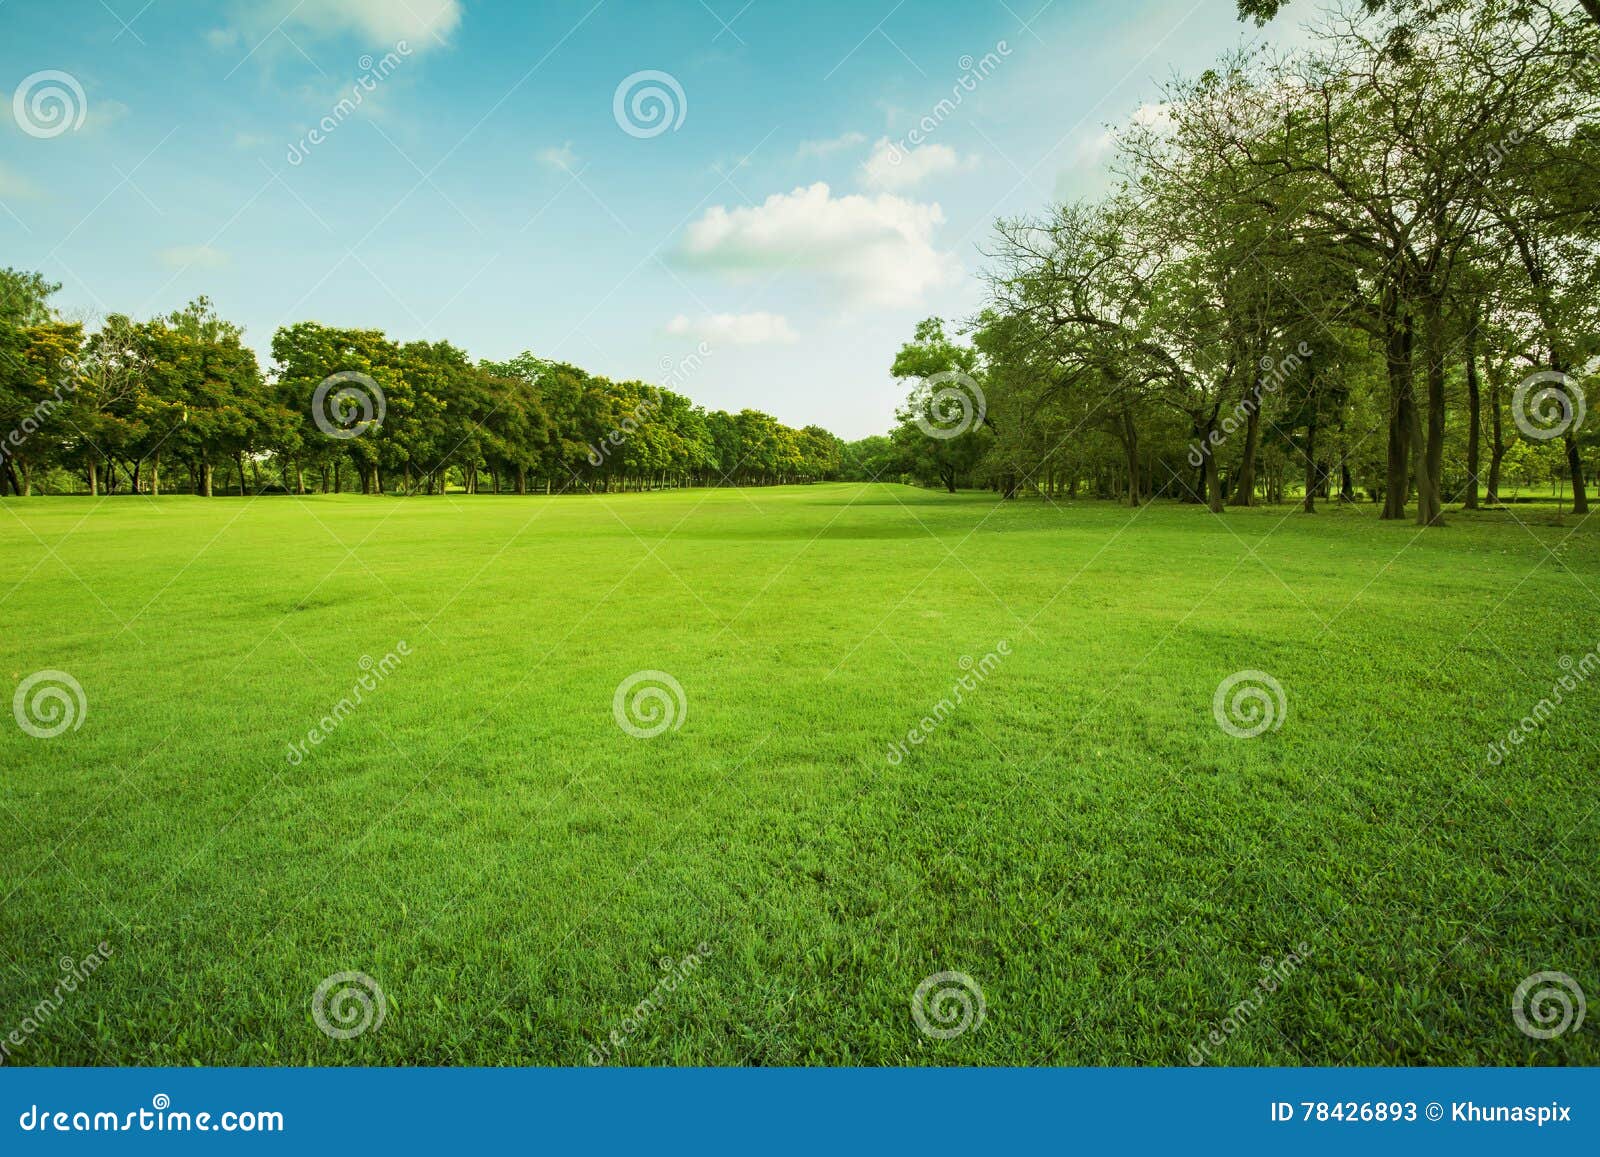 landscape of grass field and green environment public park use a